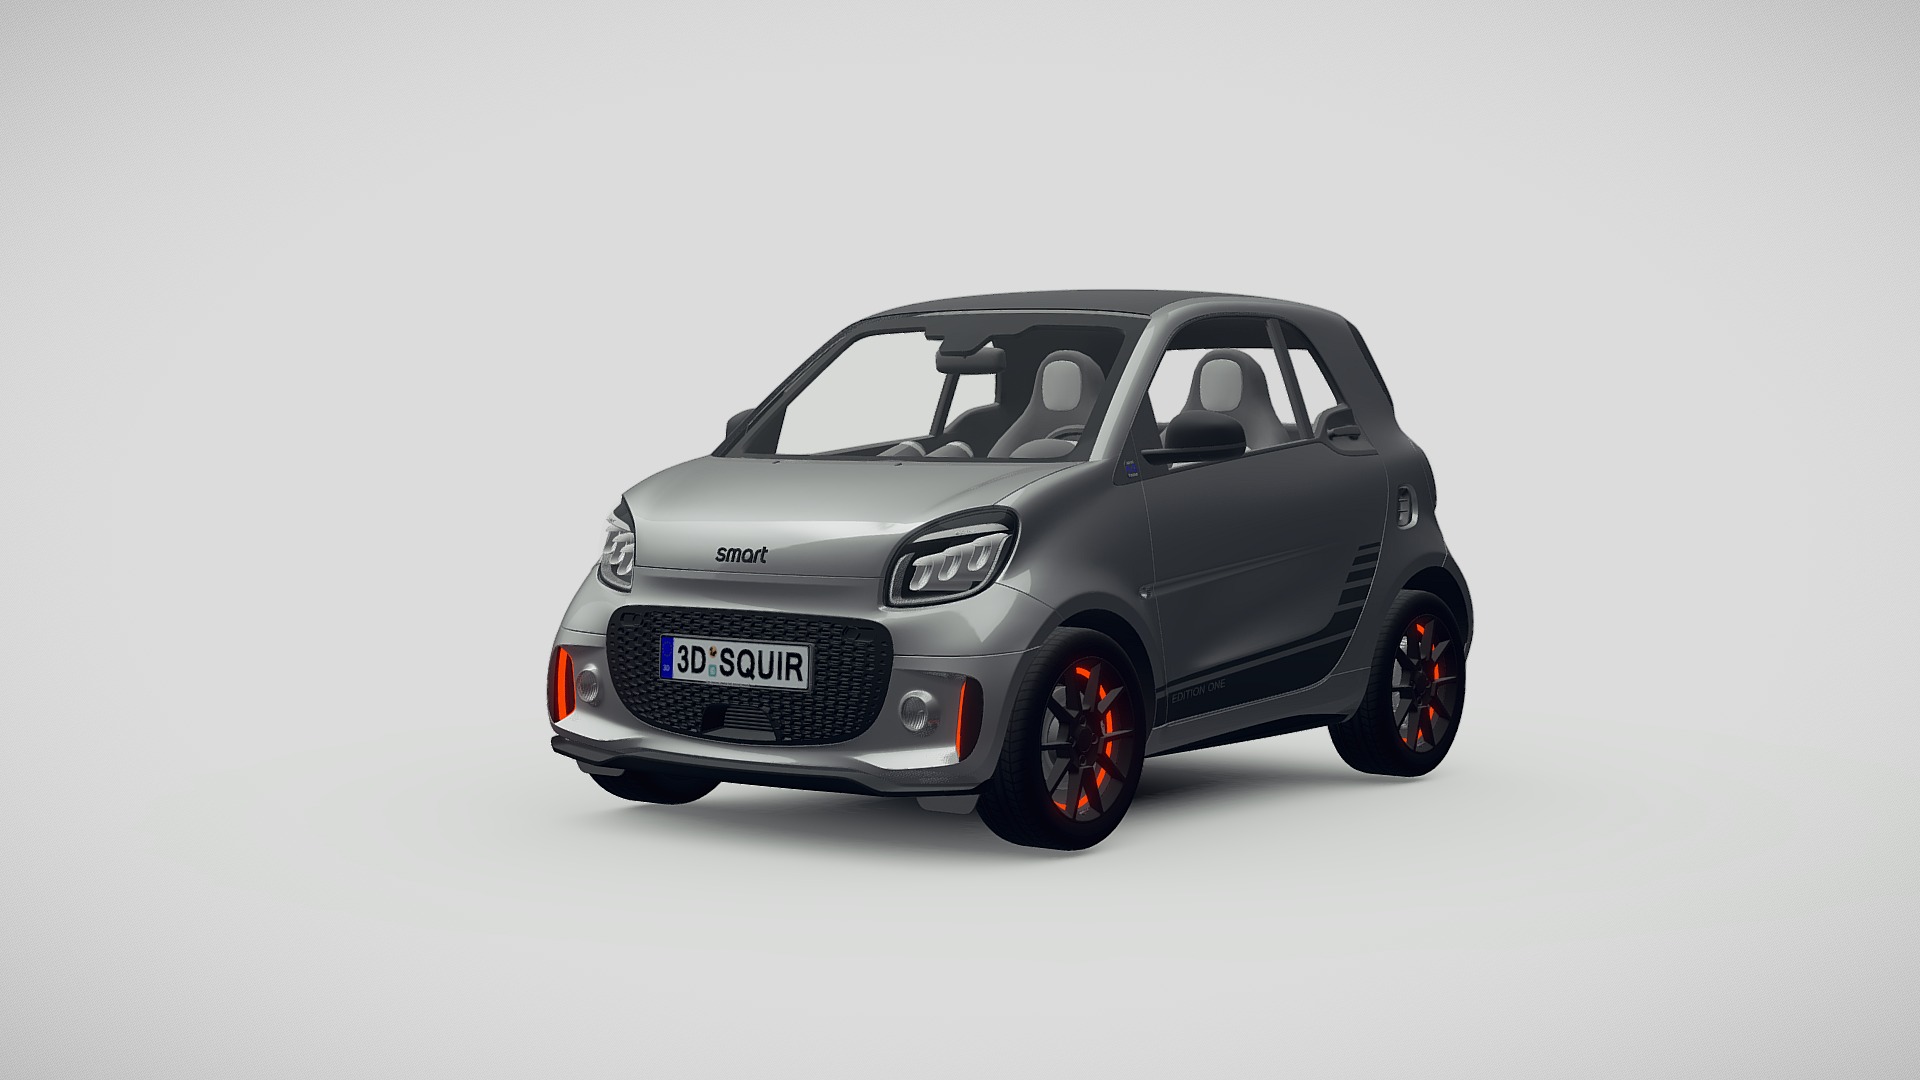 3D model Smart EQ Fortwo 2020 - This is a 3D model of the Smart EQ Fortwo 2020. The 3D model is about a car parked on a white background.